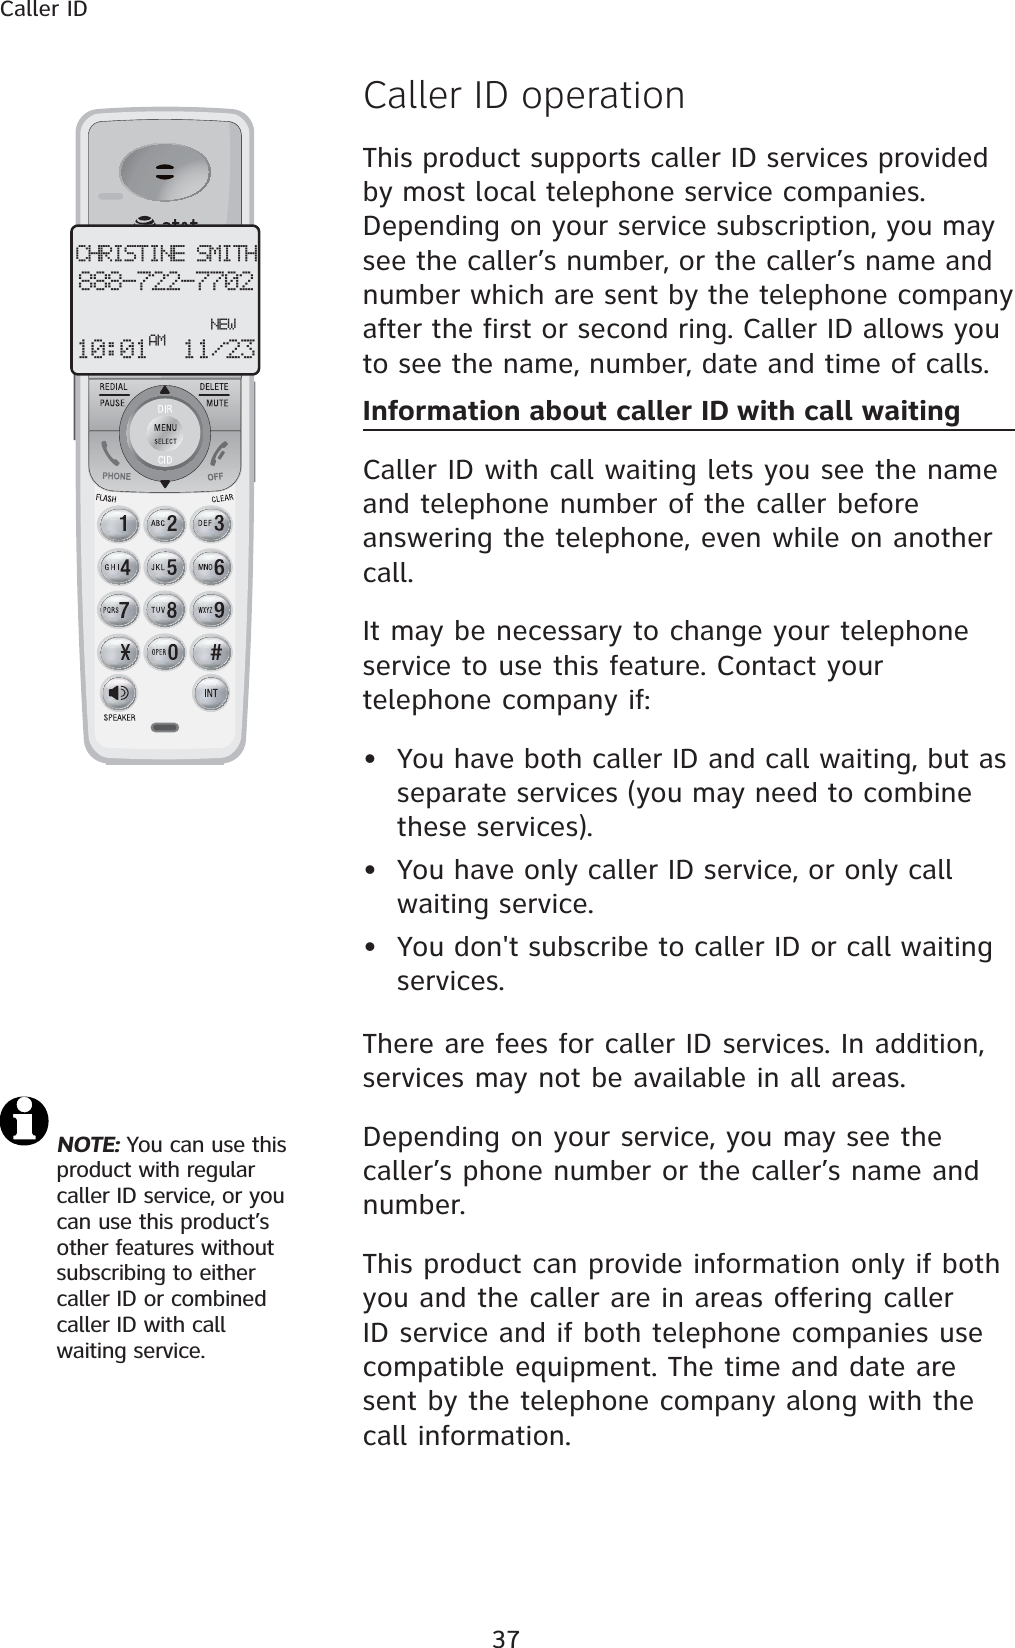 37Caller IDCaller ID operationThis product supports caller ID services provided by most local telephone service companies. Depending on your service subscription, you may see the caller’s number, or the caller’s name and number which are sent by the telephone company after the first or second ring. Caller ID allows you to see the name, number, date and time of calls.  Information about caller ID with call waitingCaller ID with call waiting lets you see the name and telephone number of the caller before answering the telephone, even while on another call.It may be necessary to change your telephone service to use this feature. Contact your telephone company if:  • You have both caller ID and call waiting, but as separate services (you may need to combine these services).• You have only caller ID service, or only call waiting service.• You don&apos;t subscribe to caller ID or call waiting services.There are fees for caller ID services. In addition, services may not be available in all areas.Depending on your service, you may see the caller’s phone number or the caller’s name and number. This product can provide information only if both you and the caller are in areas offering caller ID service and if both telephone companies use compatible equipment. The time and date are sent by the telephone company along with the call information.CHRISTINE SMITH888-722-7702NEW10:01 11/23AMNOTE: You can use this product with regular caller ID service, or you can use this product’s other features without subscribing to either caller ID or combined caller ID with call waiting service. 